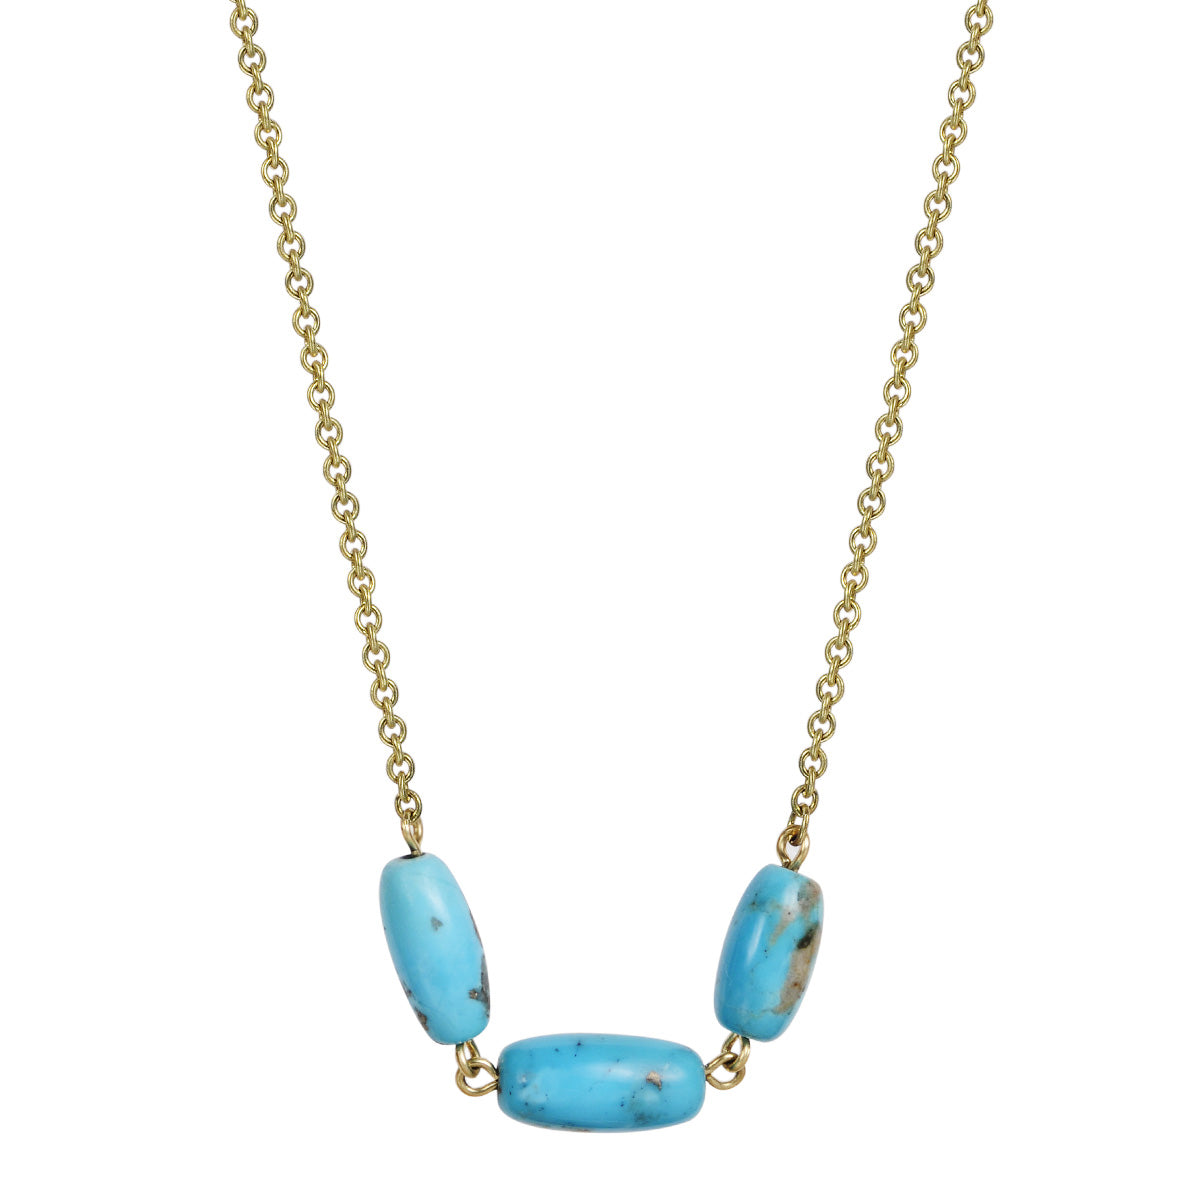 18K Gold Persian Turquoise 3 Bead Necklace on Chain